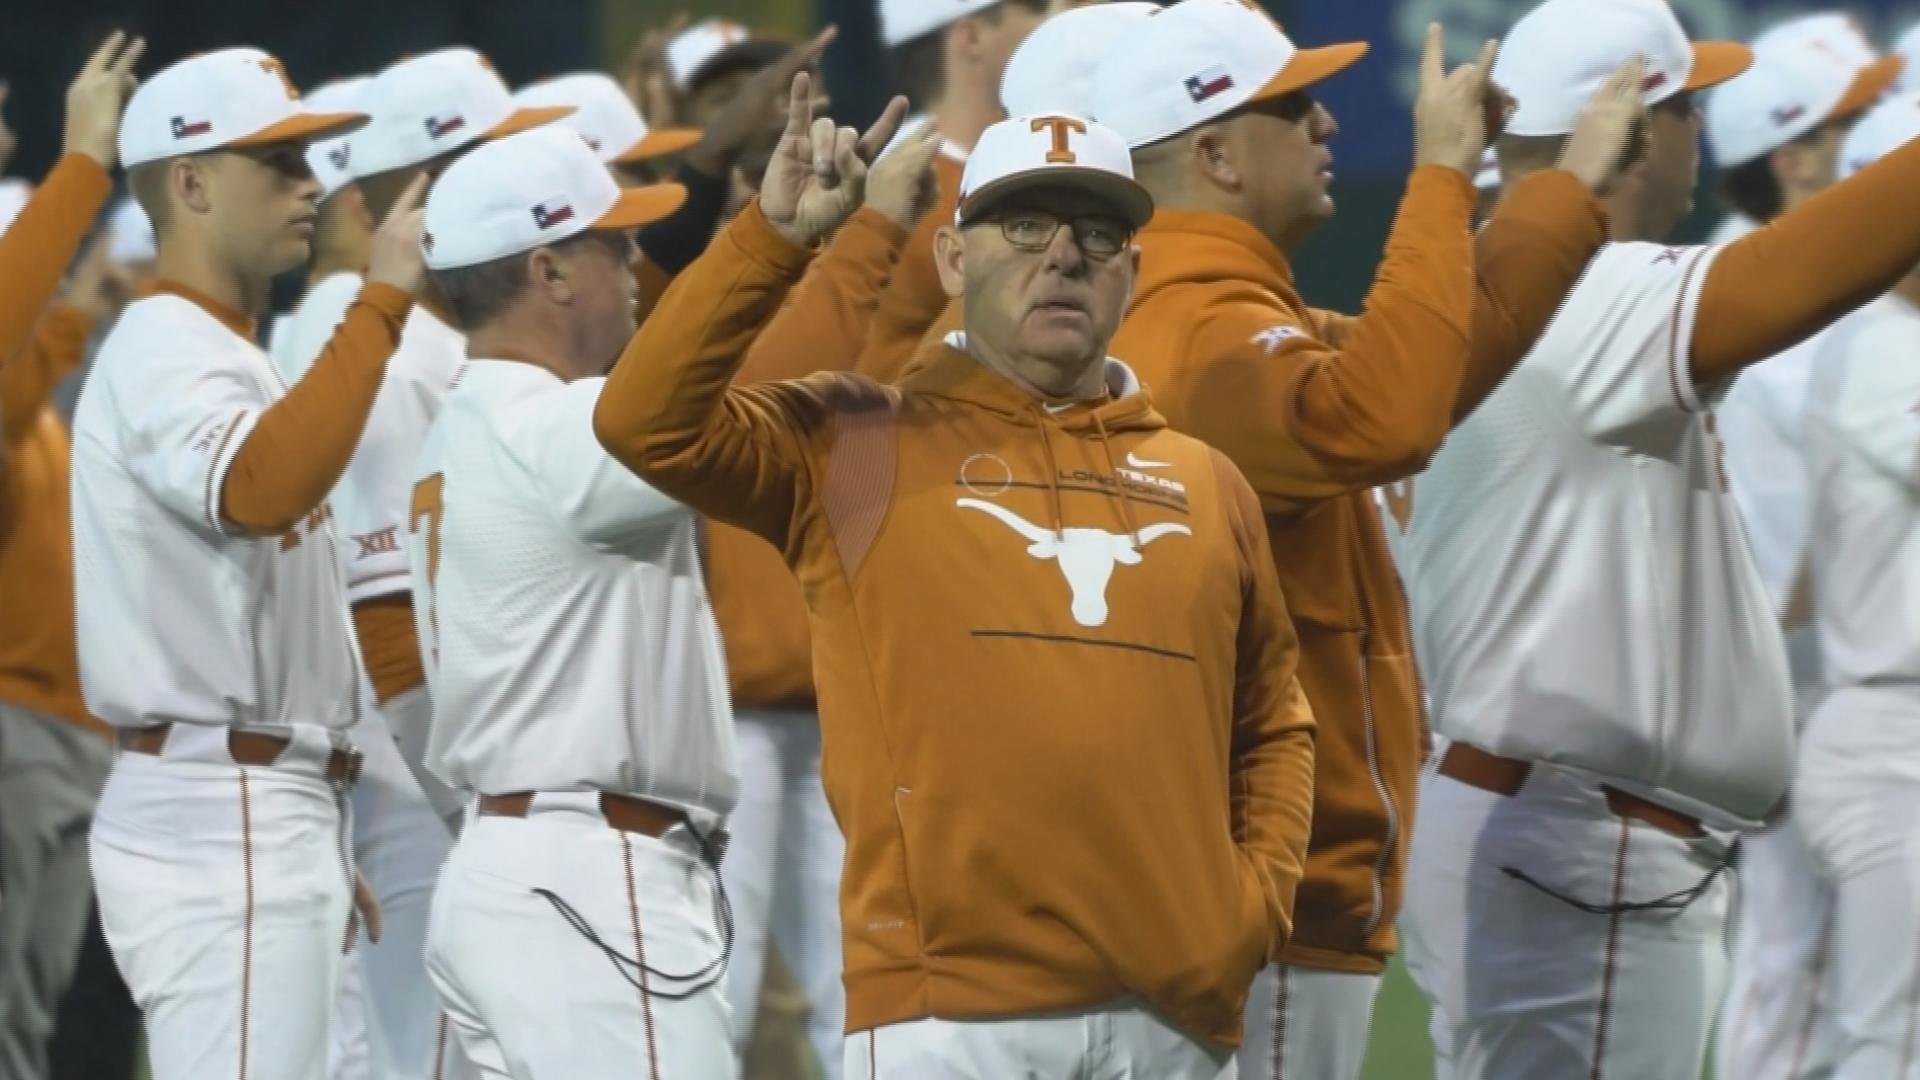 David Pierce is out as coach of the Texas baseball team. Both the University of Texas and Pierce call this decision a "mutual agreement."